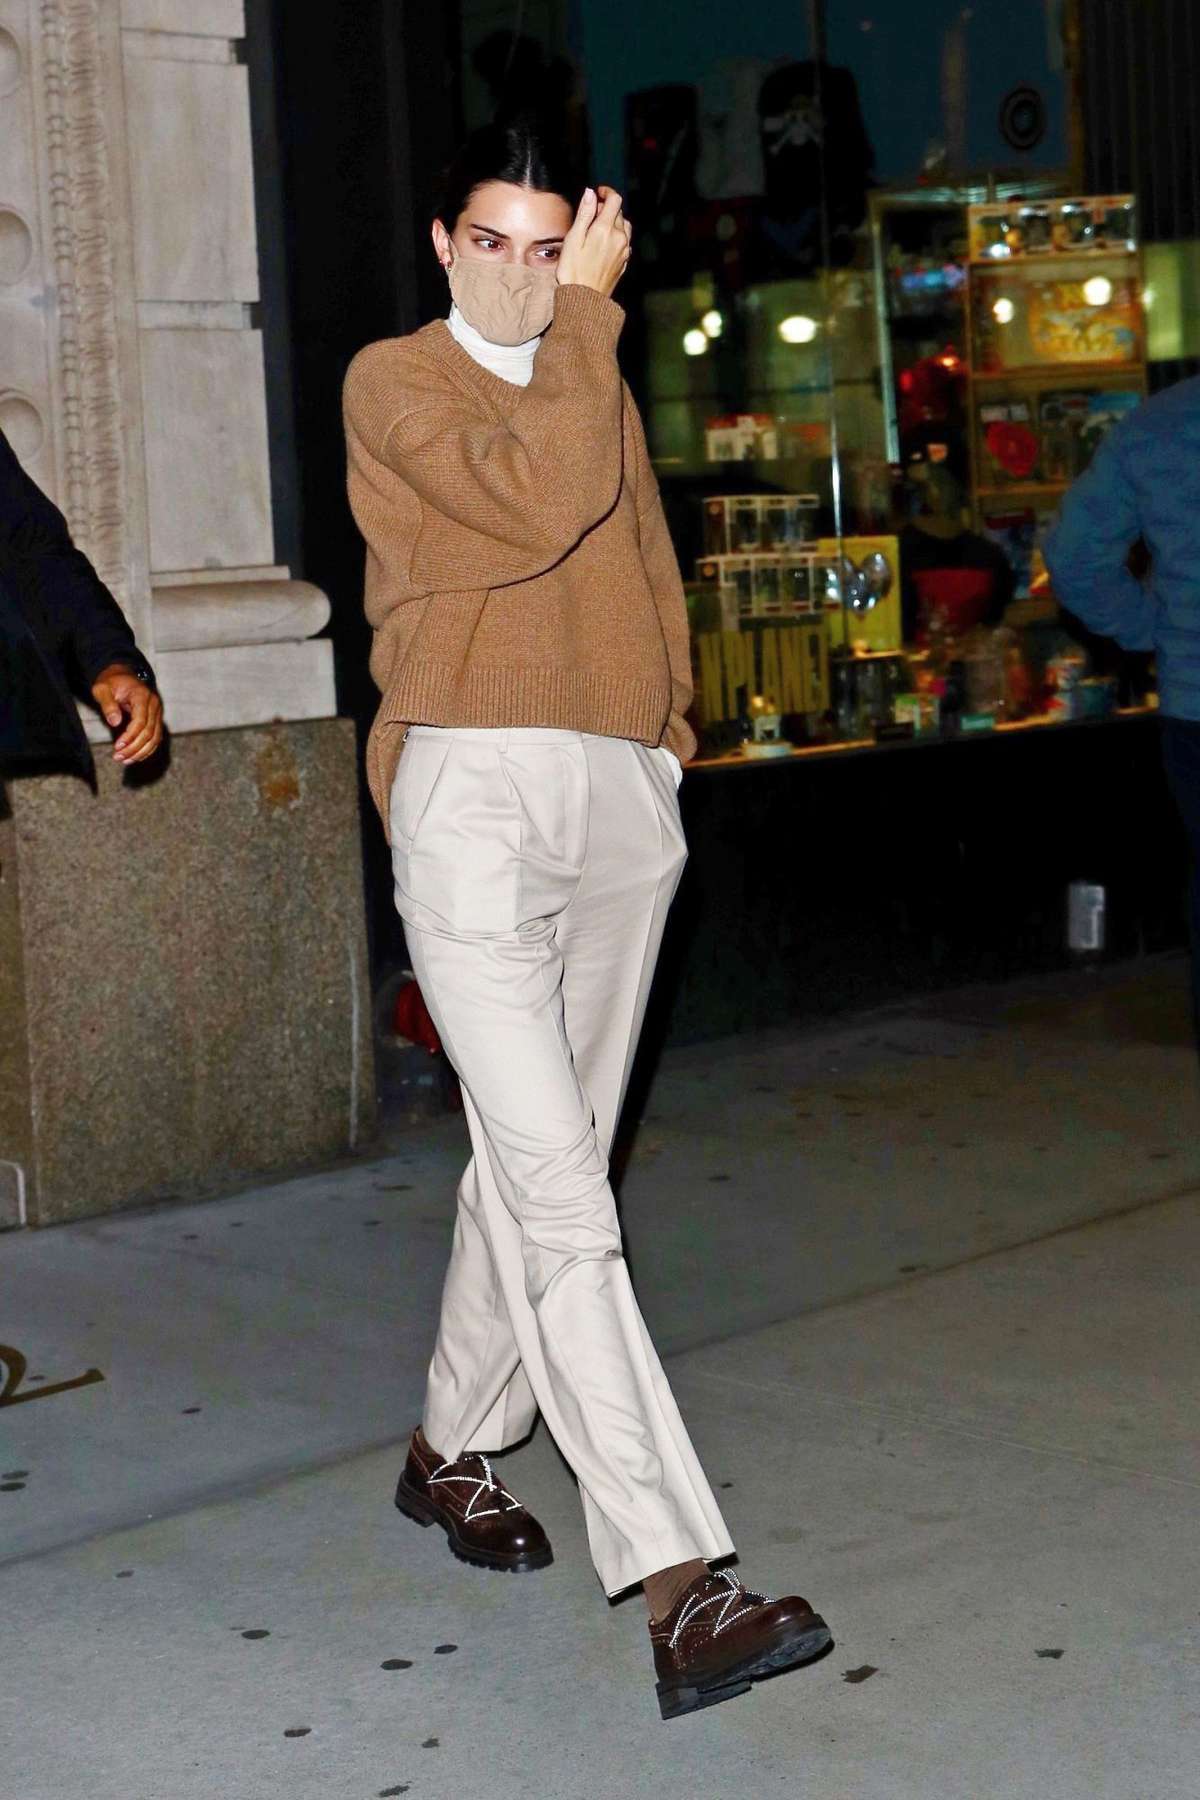 Kendall Jenner Rewears Grandpa Outfit